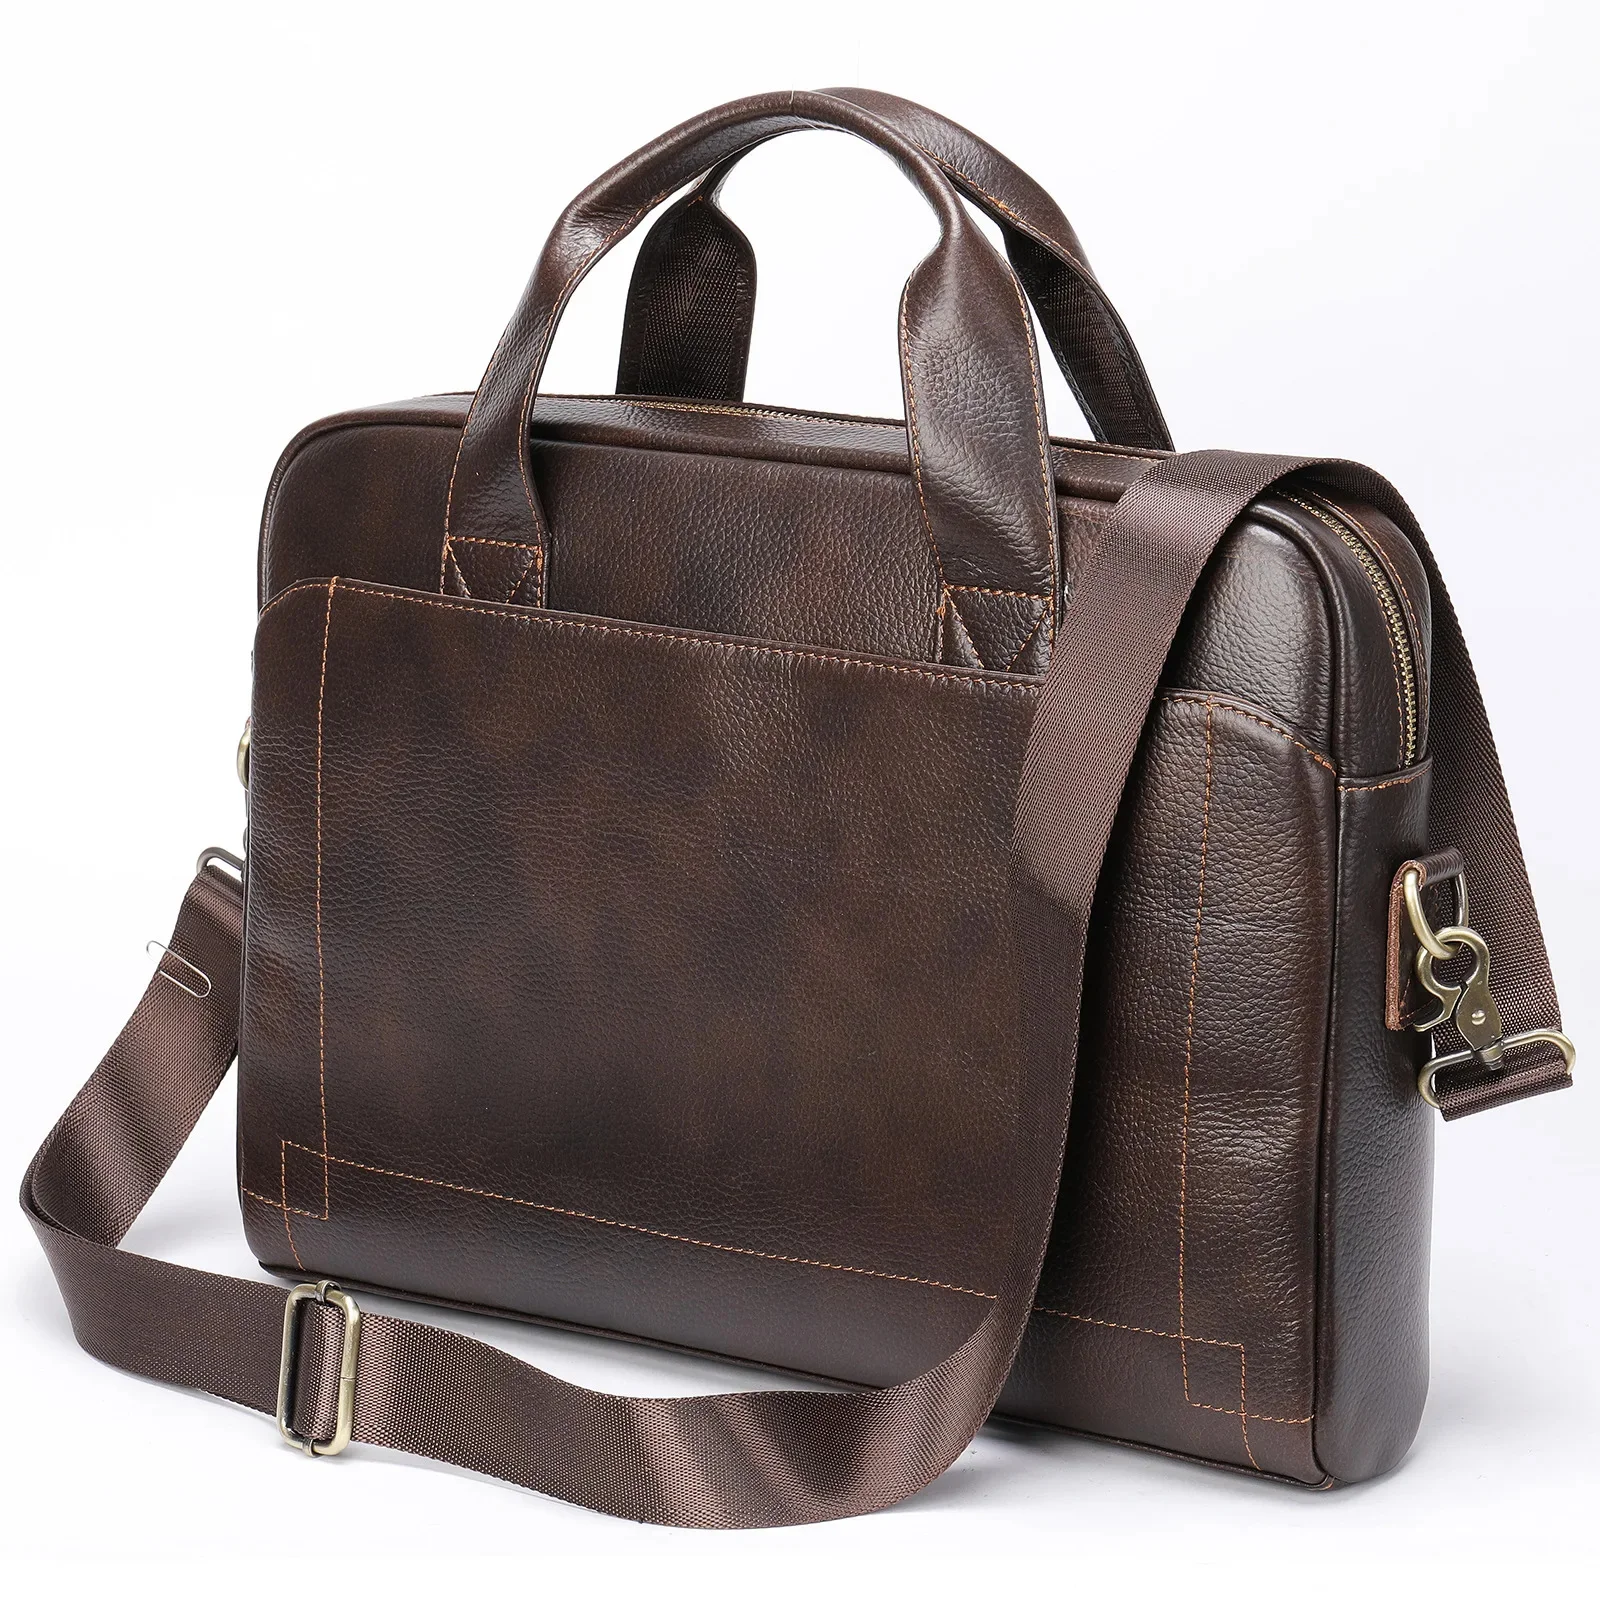 

Hot Sell Men's Leather Briefcase Bag Genuine Cowhide Man Laptop Business Handbags For Male Tote Attache Case A4 Size